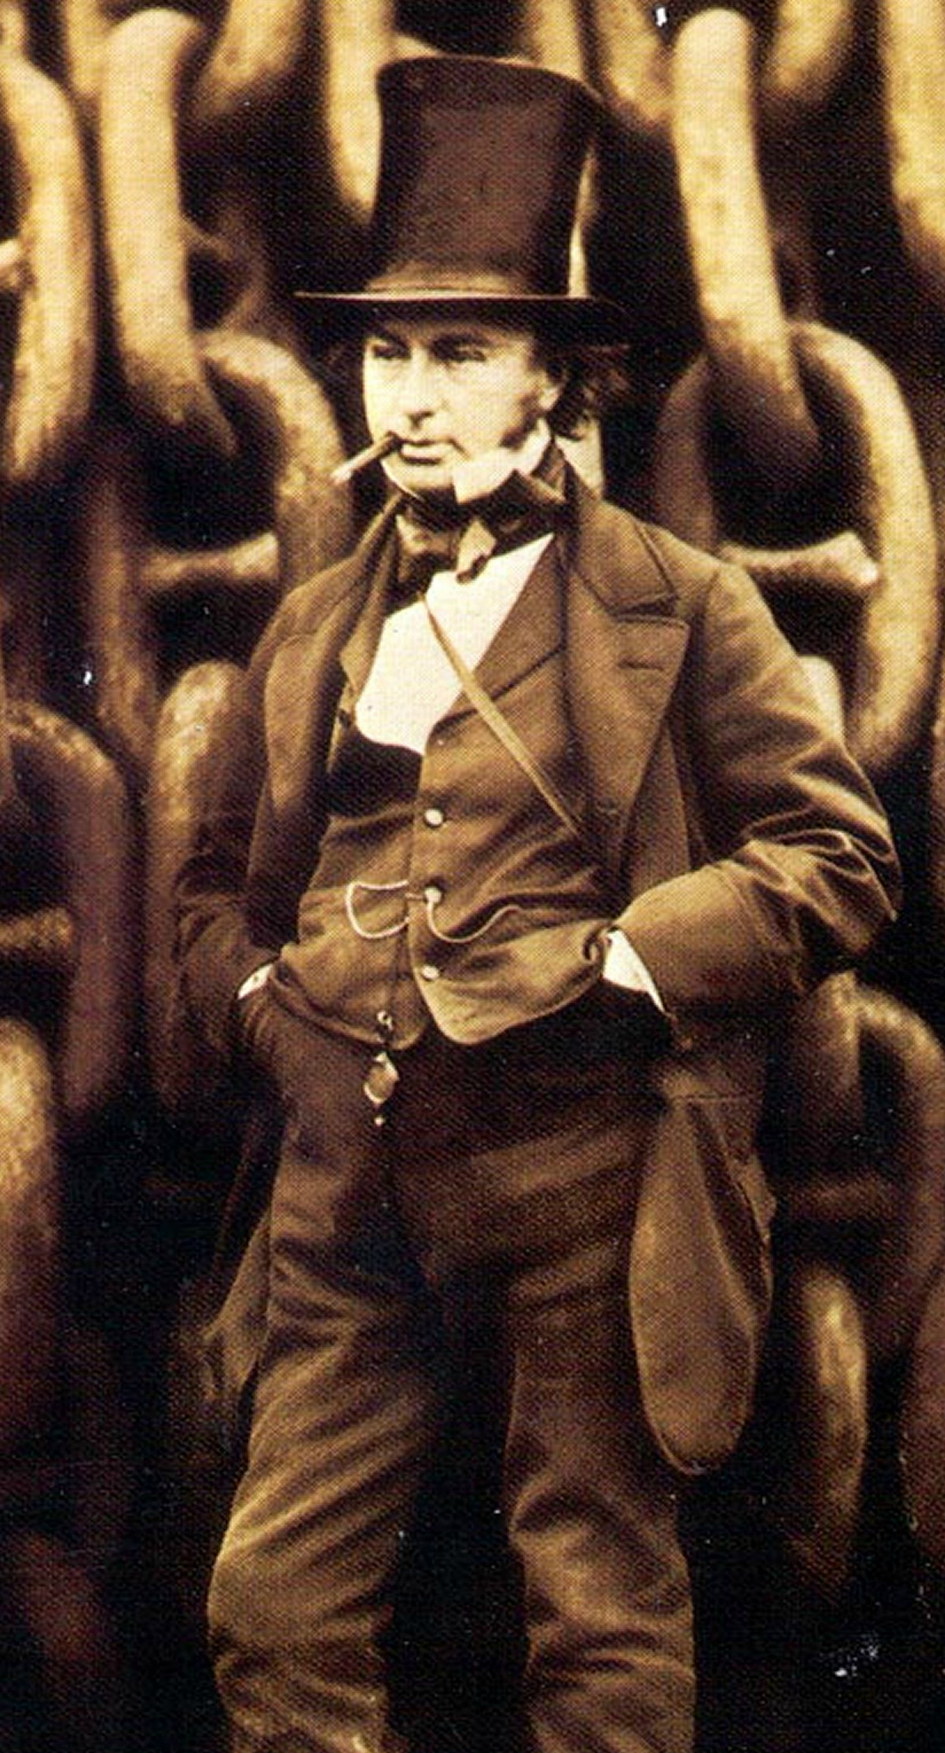 Brunel in front of chains